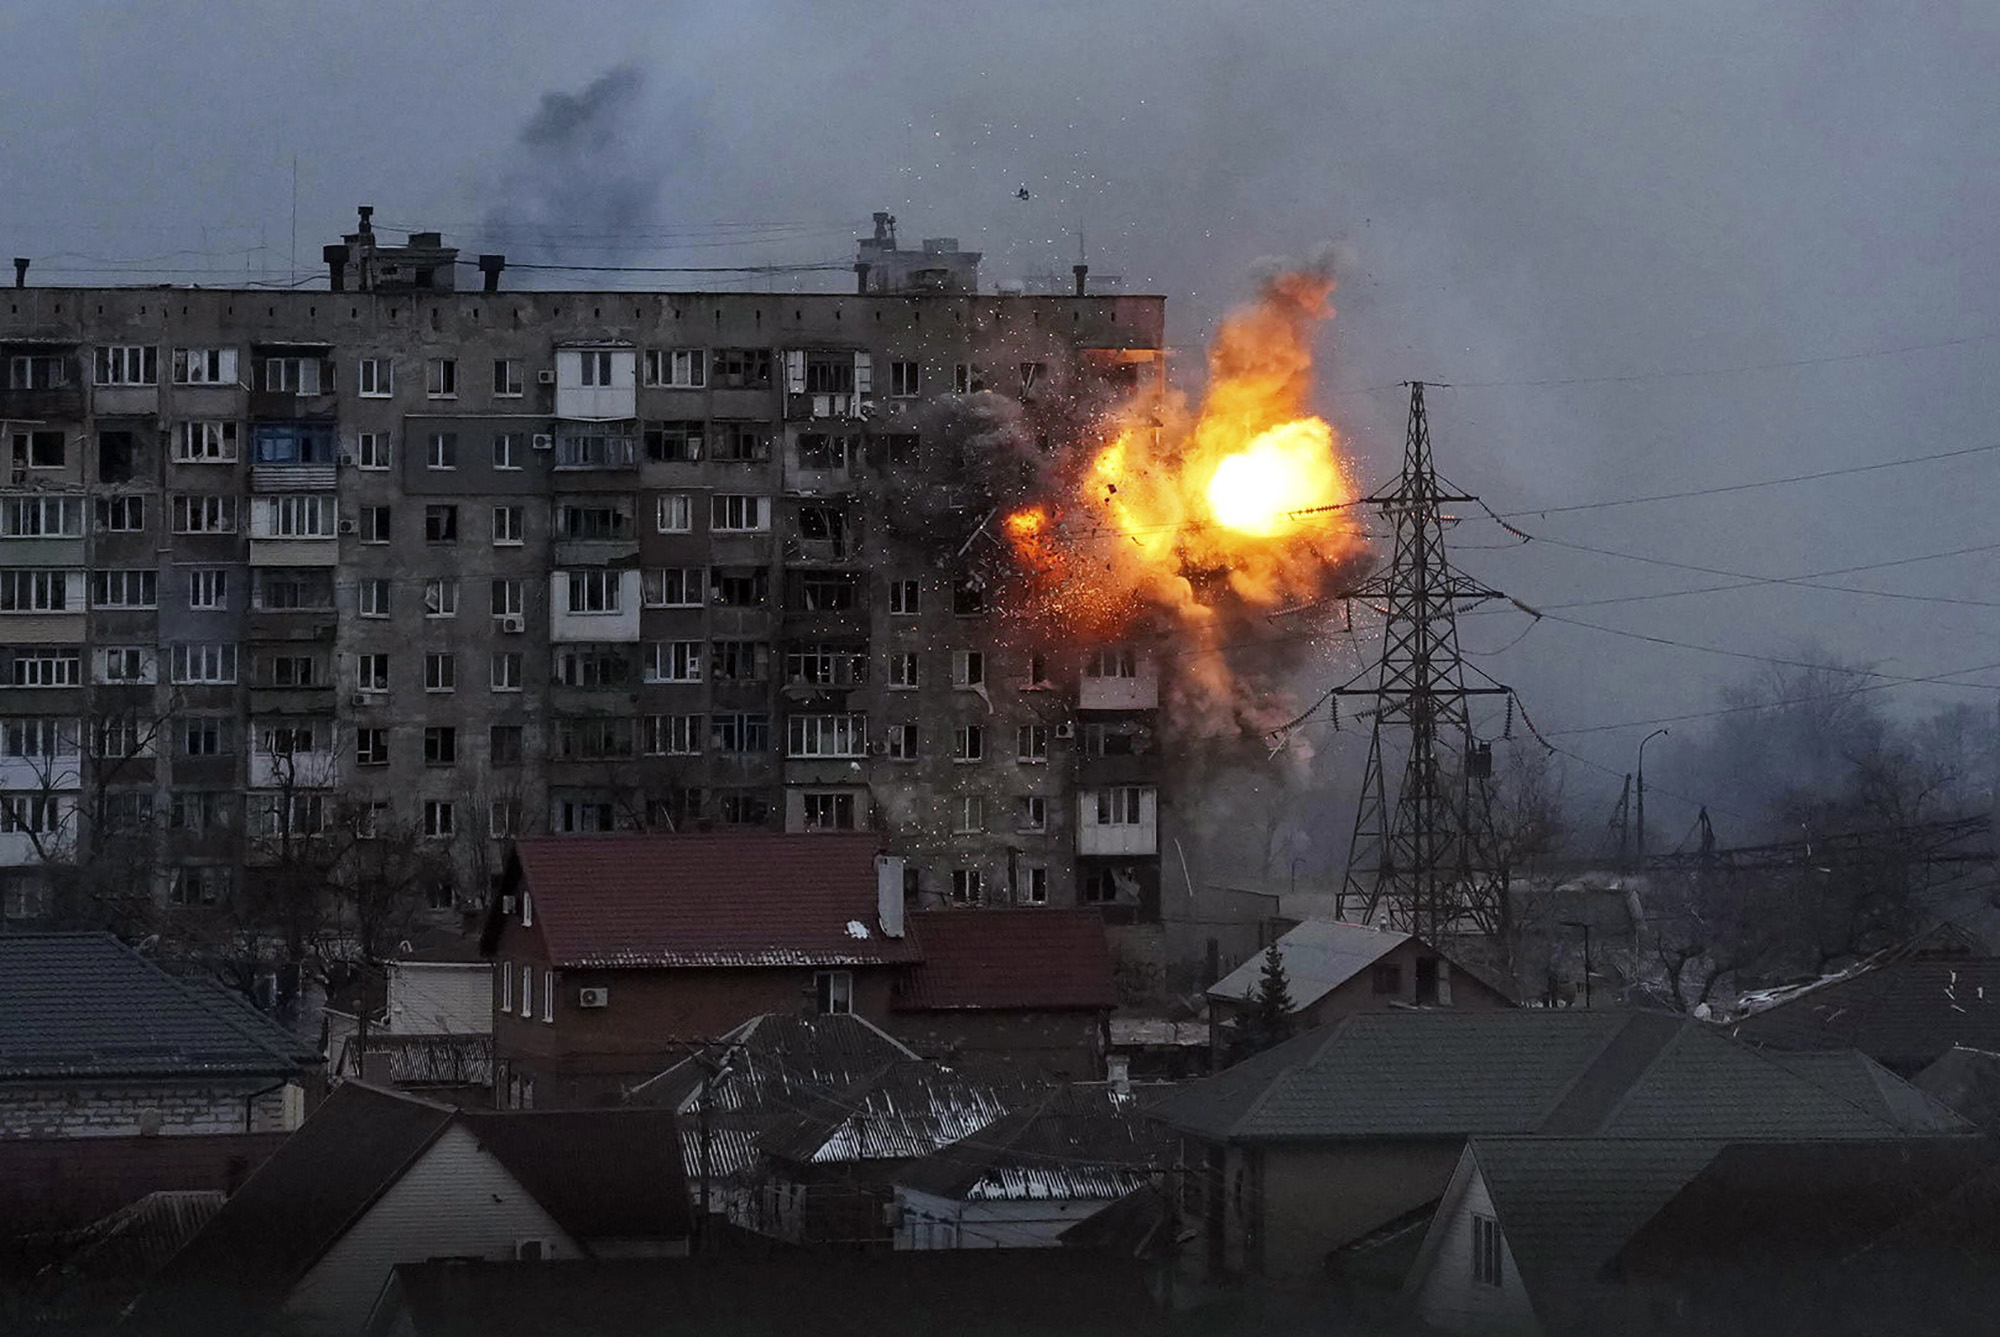 An explosion tears a hole in the side of an apartment building after a Russian tank fired a rocket in Mariupol, Ukraine.